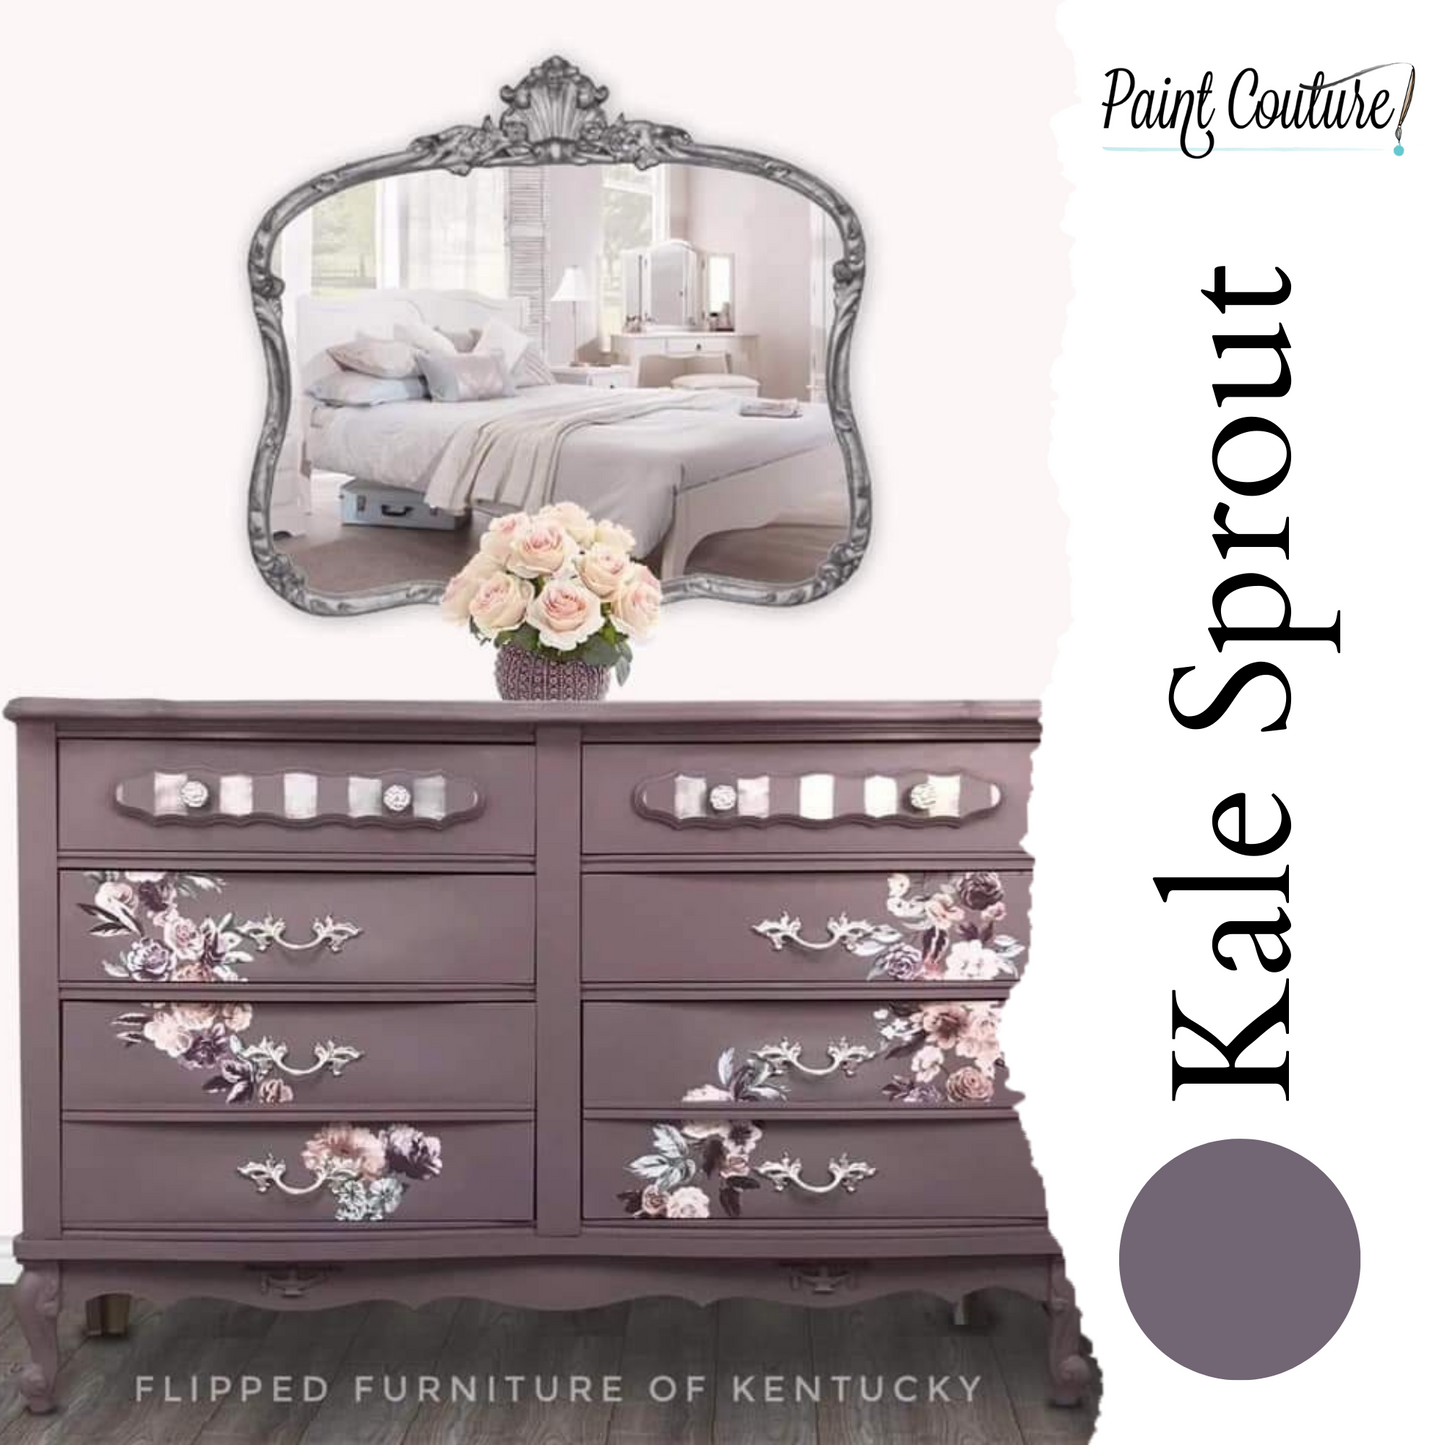 Paint Couture Kale Sprout - Acrylic Mineral Paint with a Flat Finish!